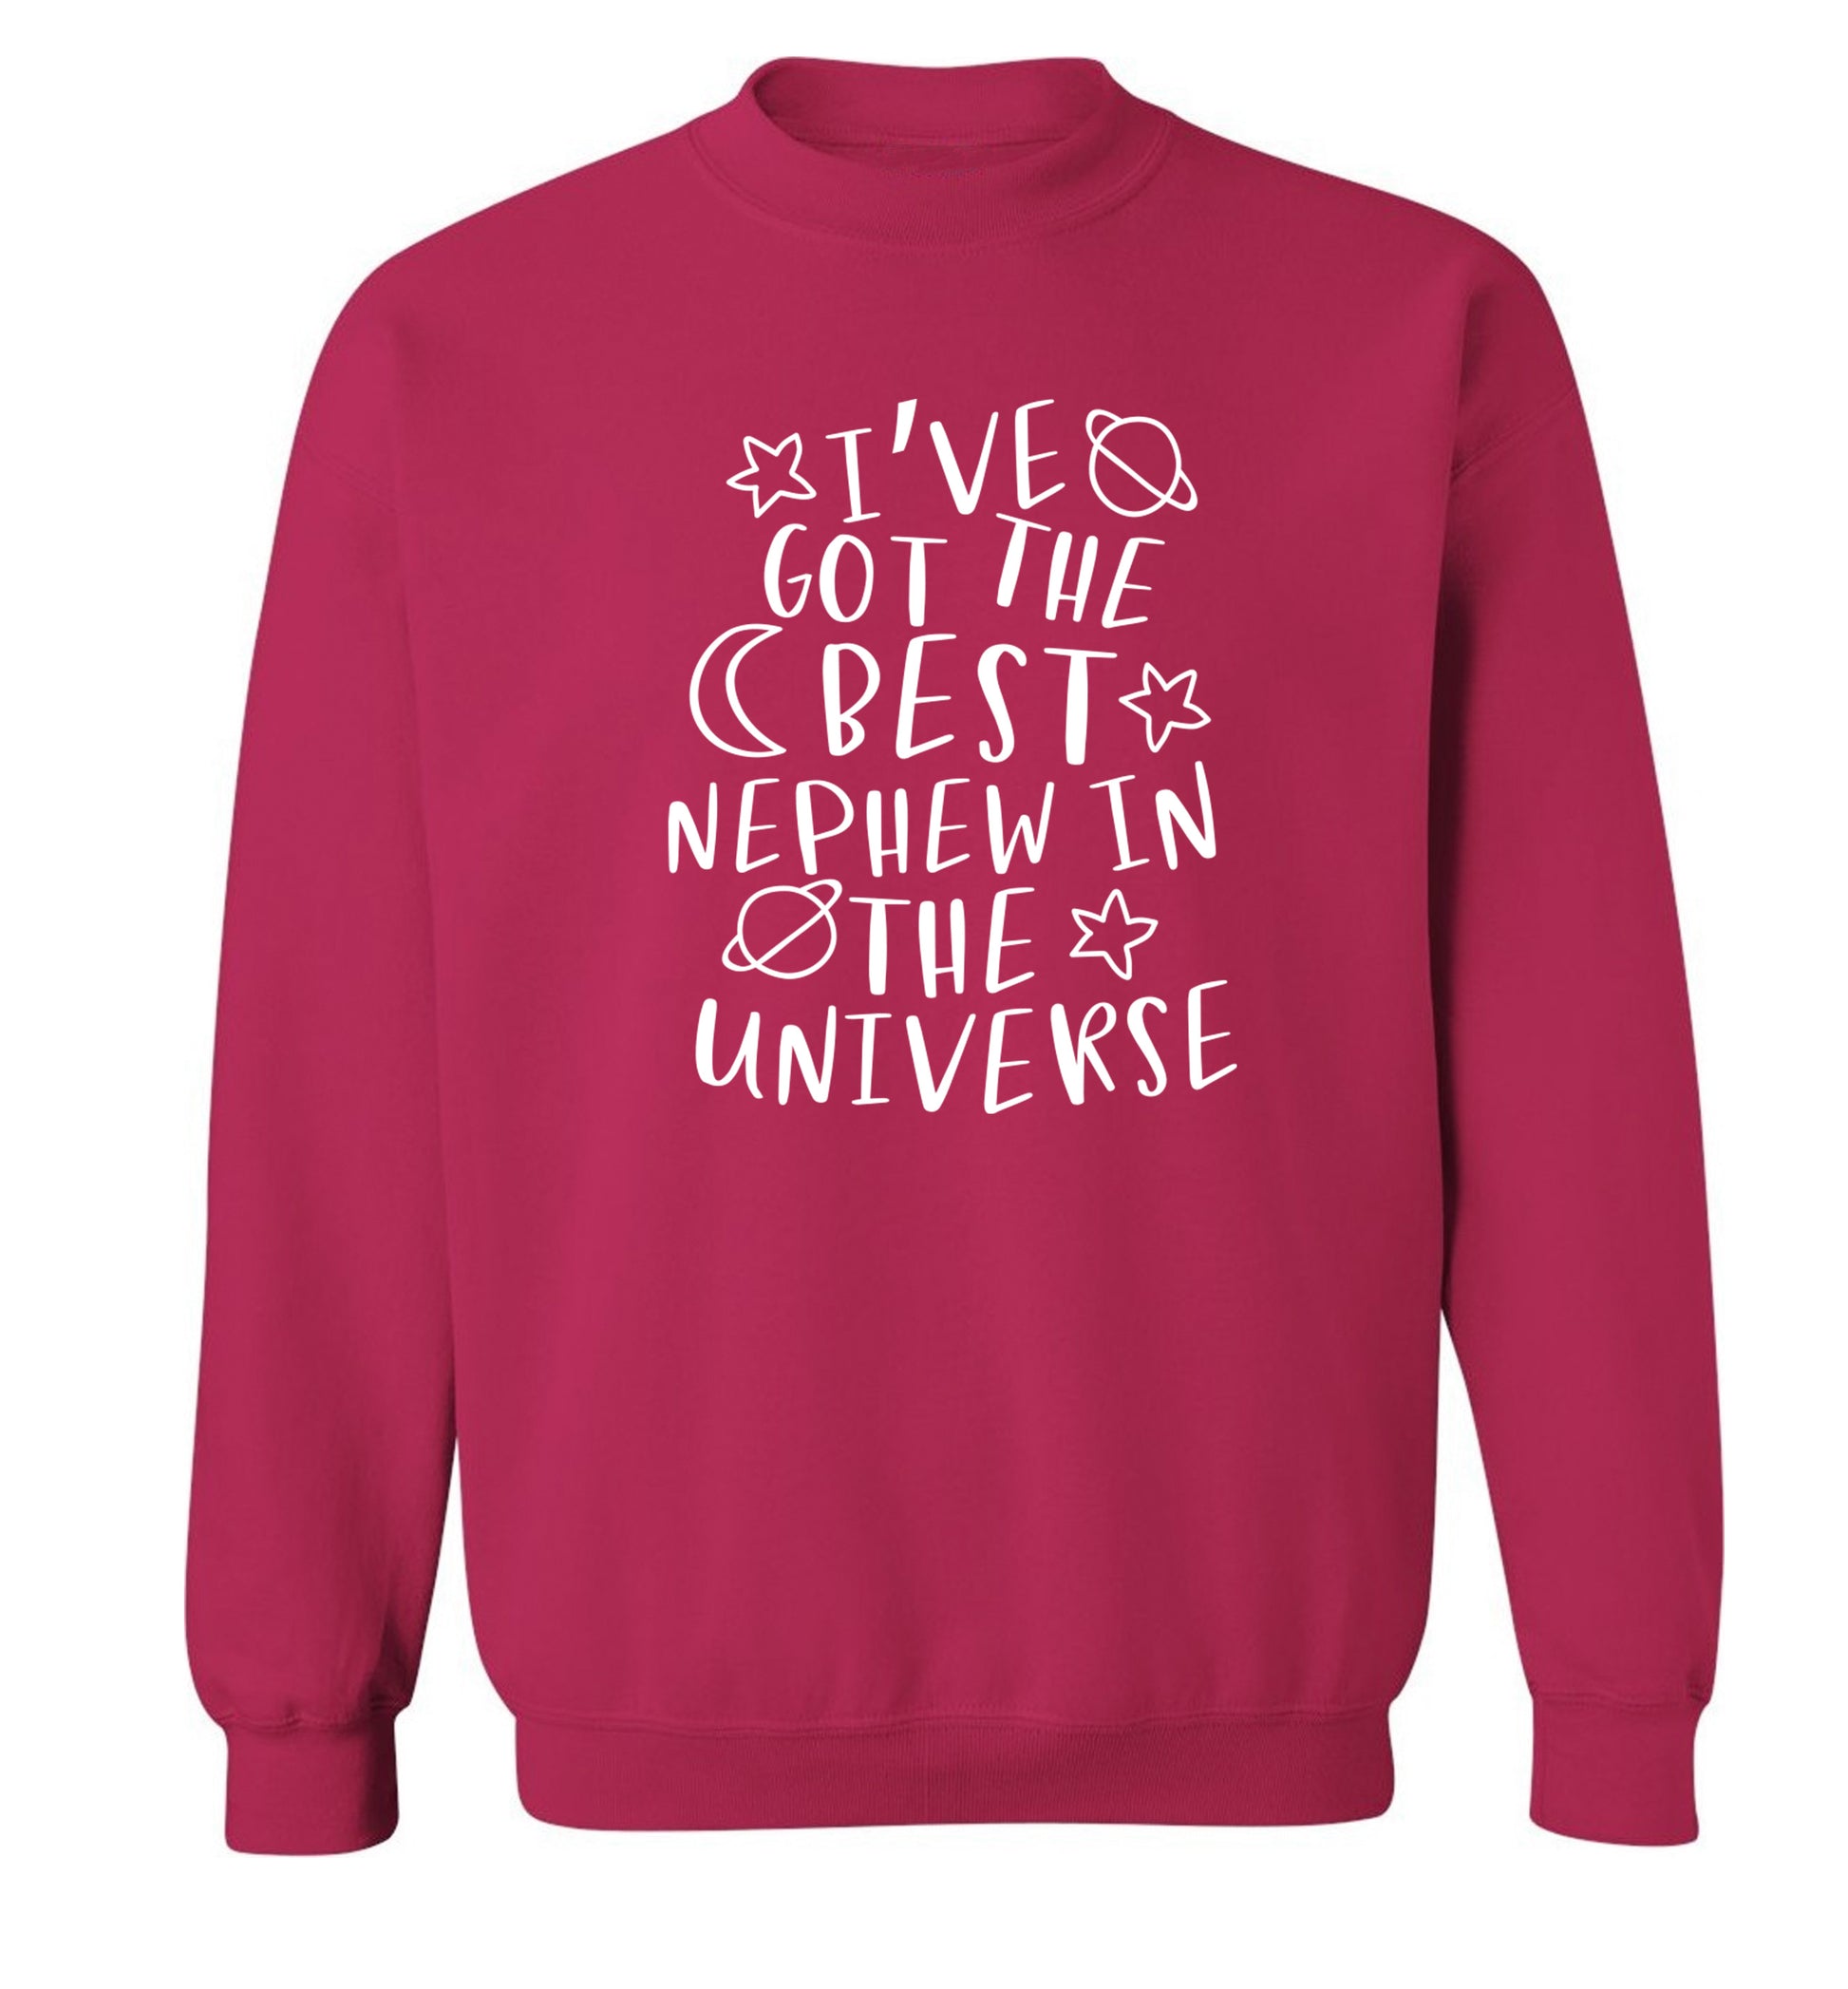 I've got the best nephew in the universe Adult's unisex pink Sweater 2XL